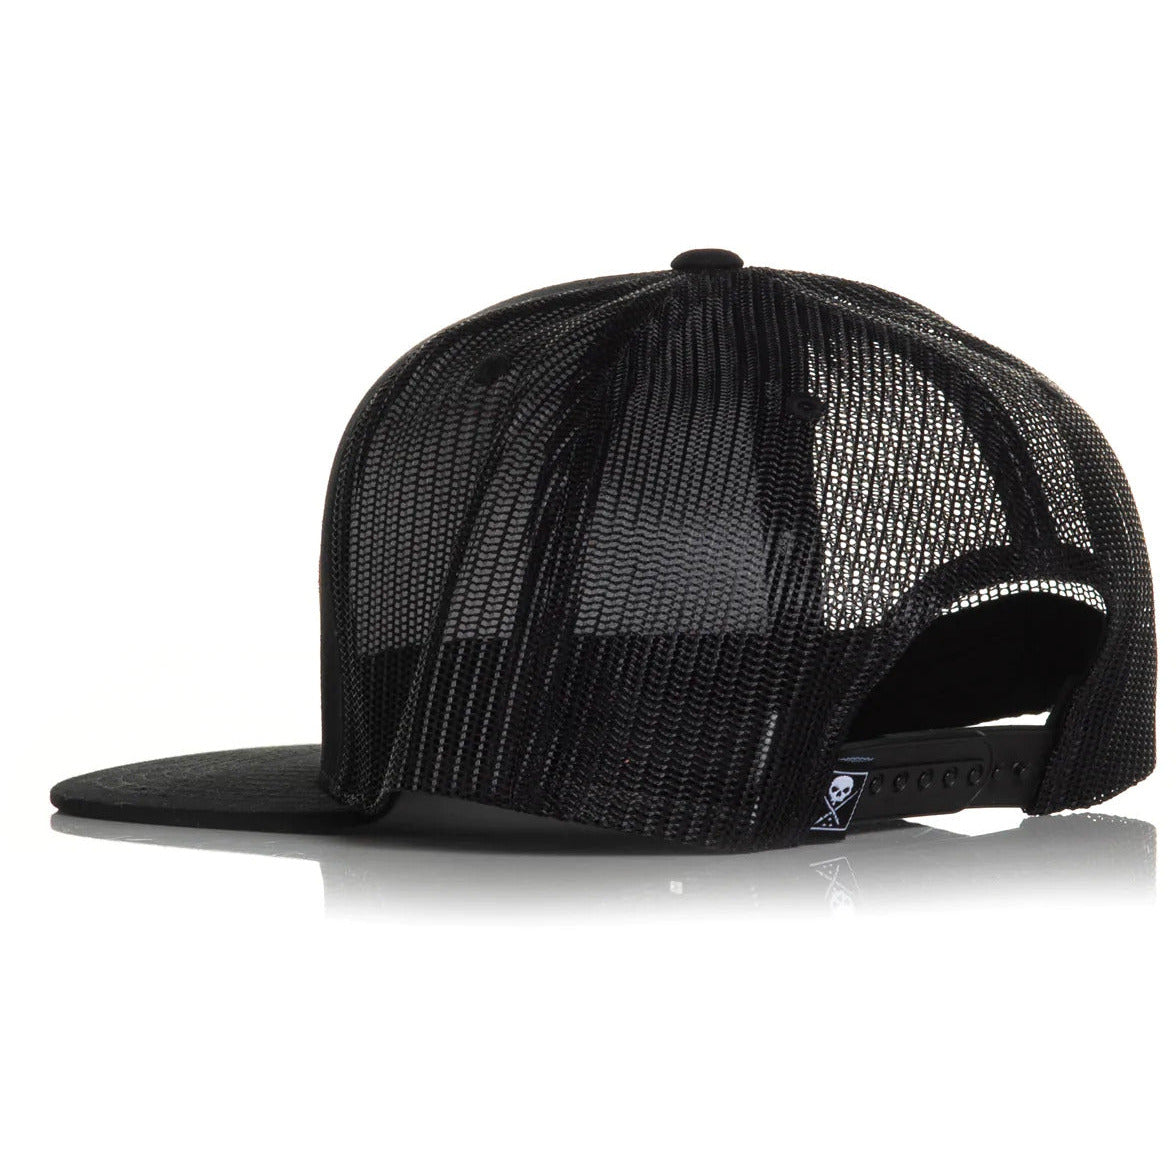 SULLEN-ART-COLLECTIVE-NEVER-DEFEATED-SNAPBACK-TRUCKER - HAT - Synik Clothing - synikclothing.com